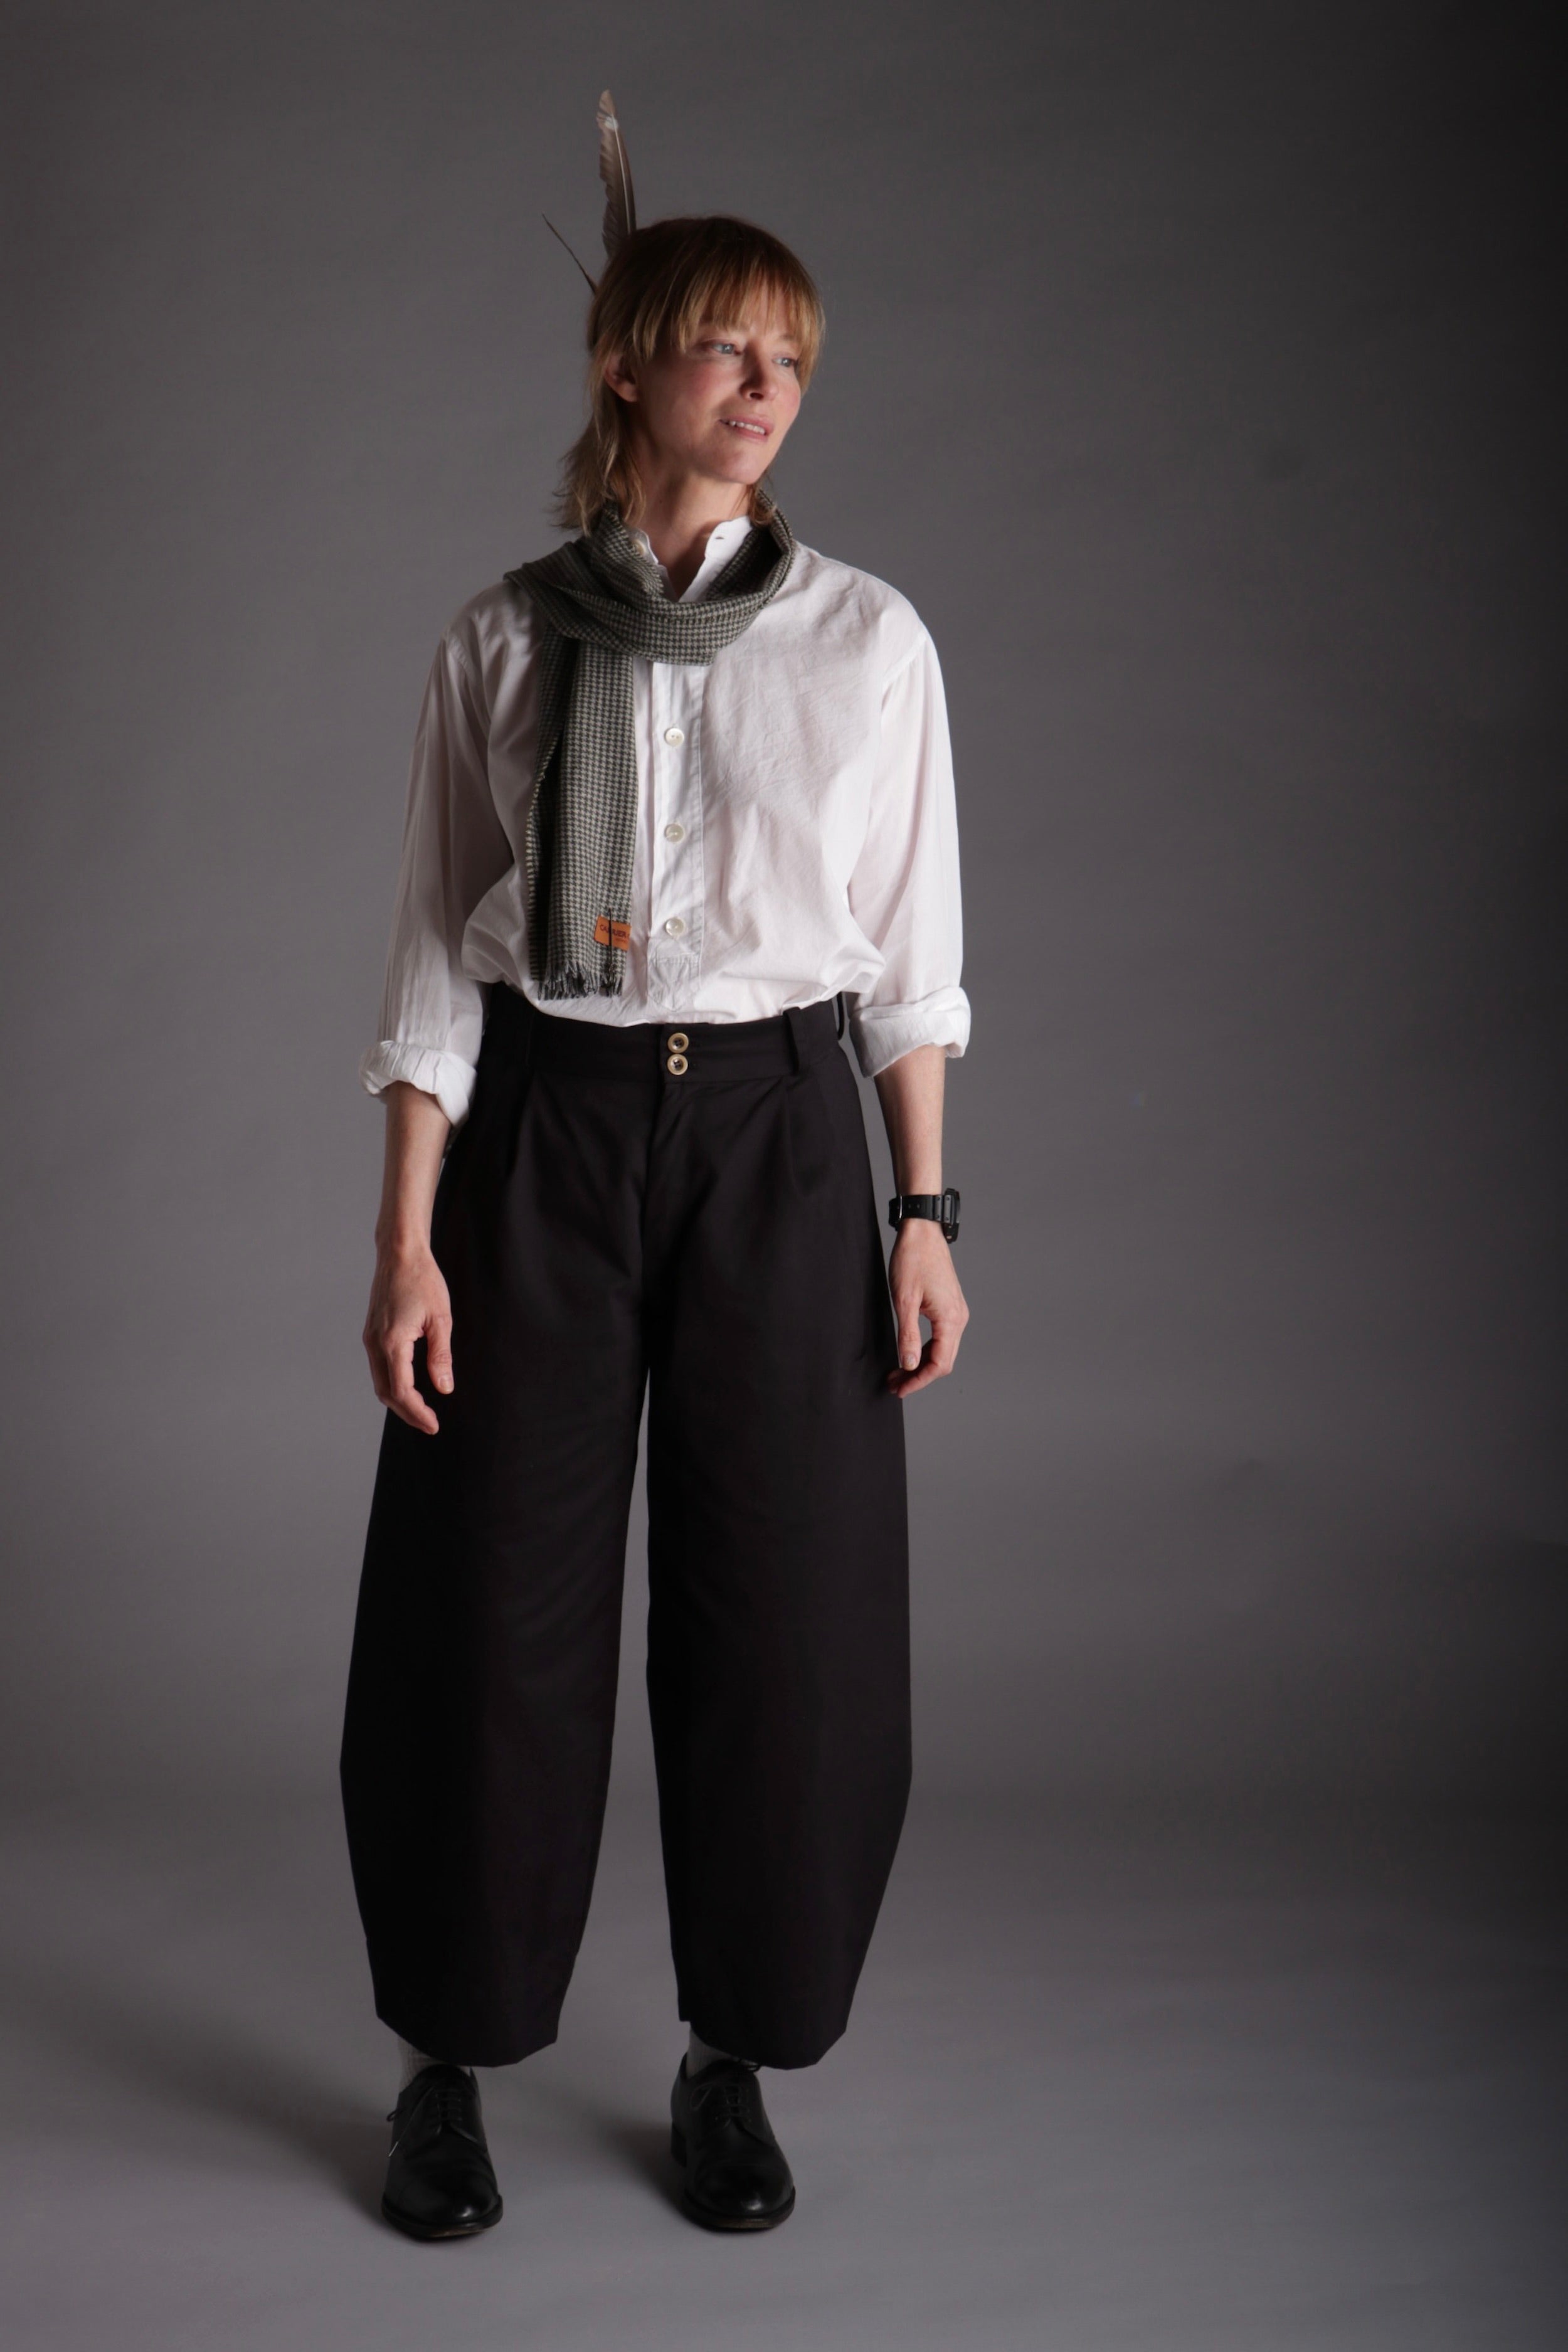 Sienna wears Carrier Company Dutch Trousers in Black Cotton Drill with Lightweight Collarless Shirt